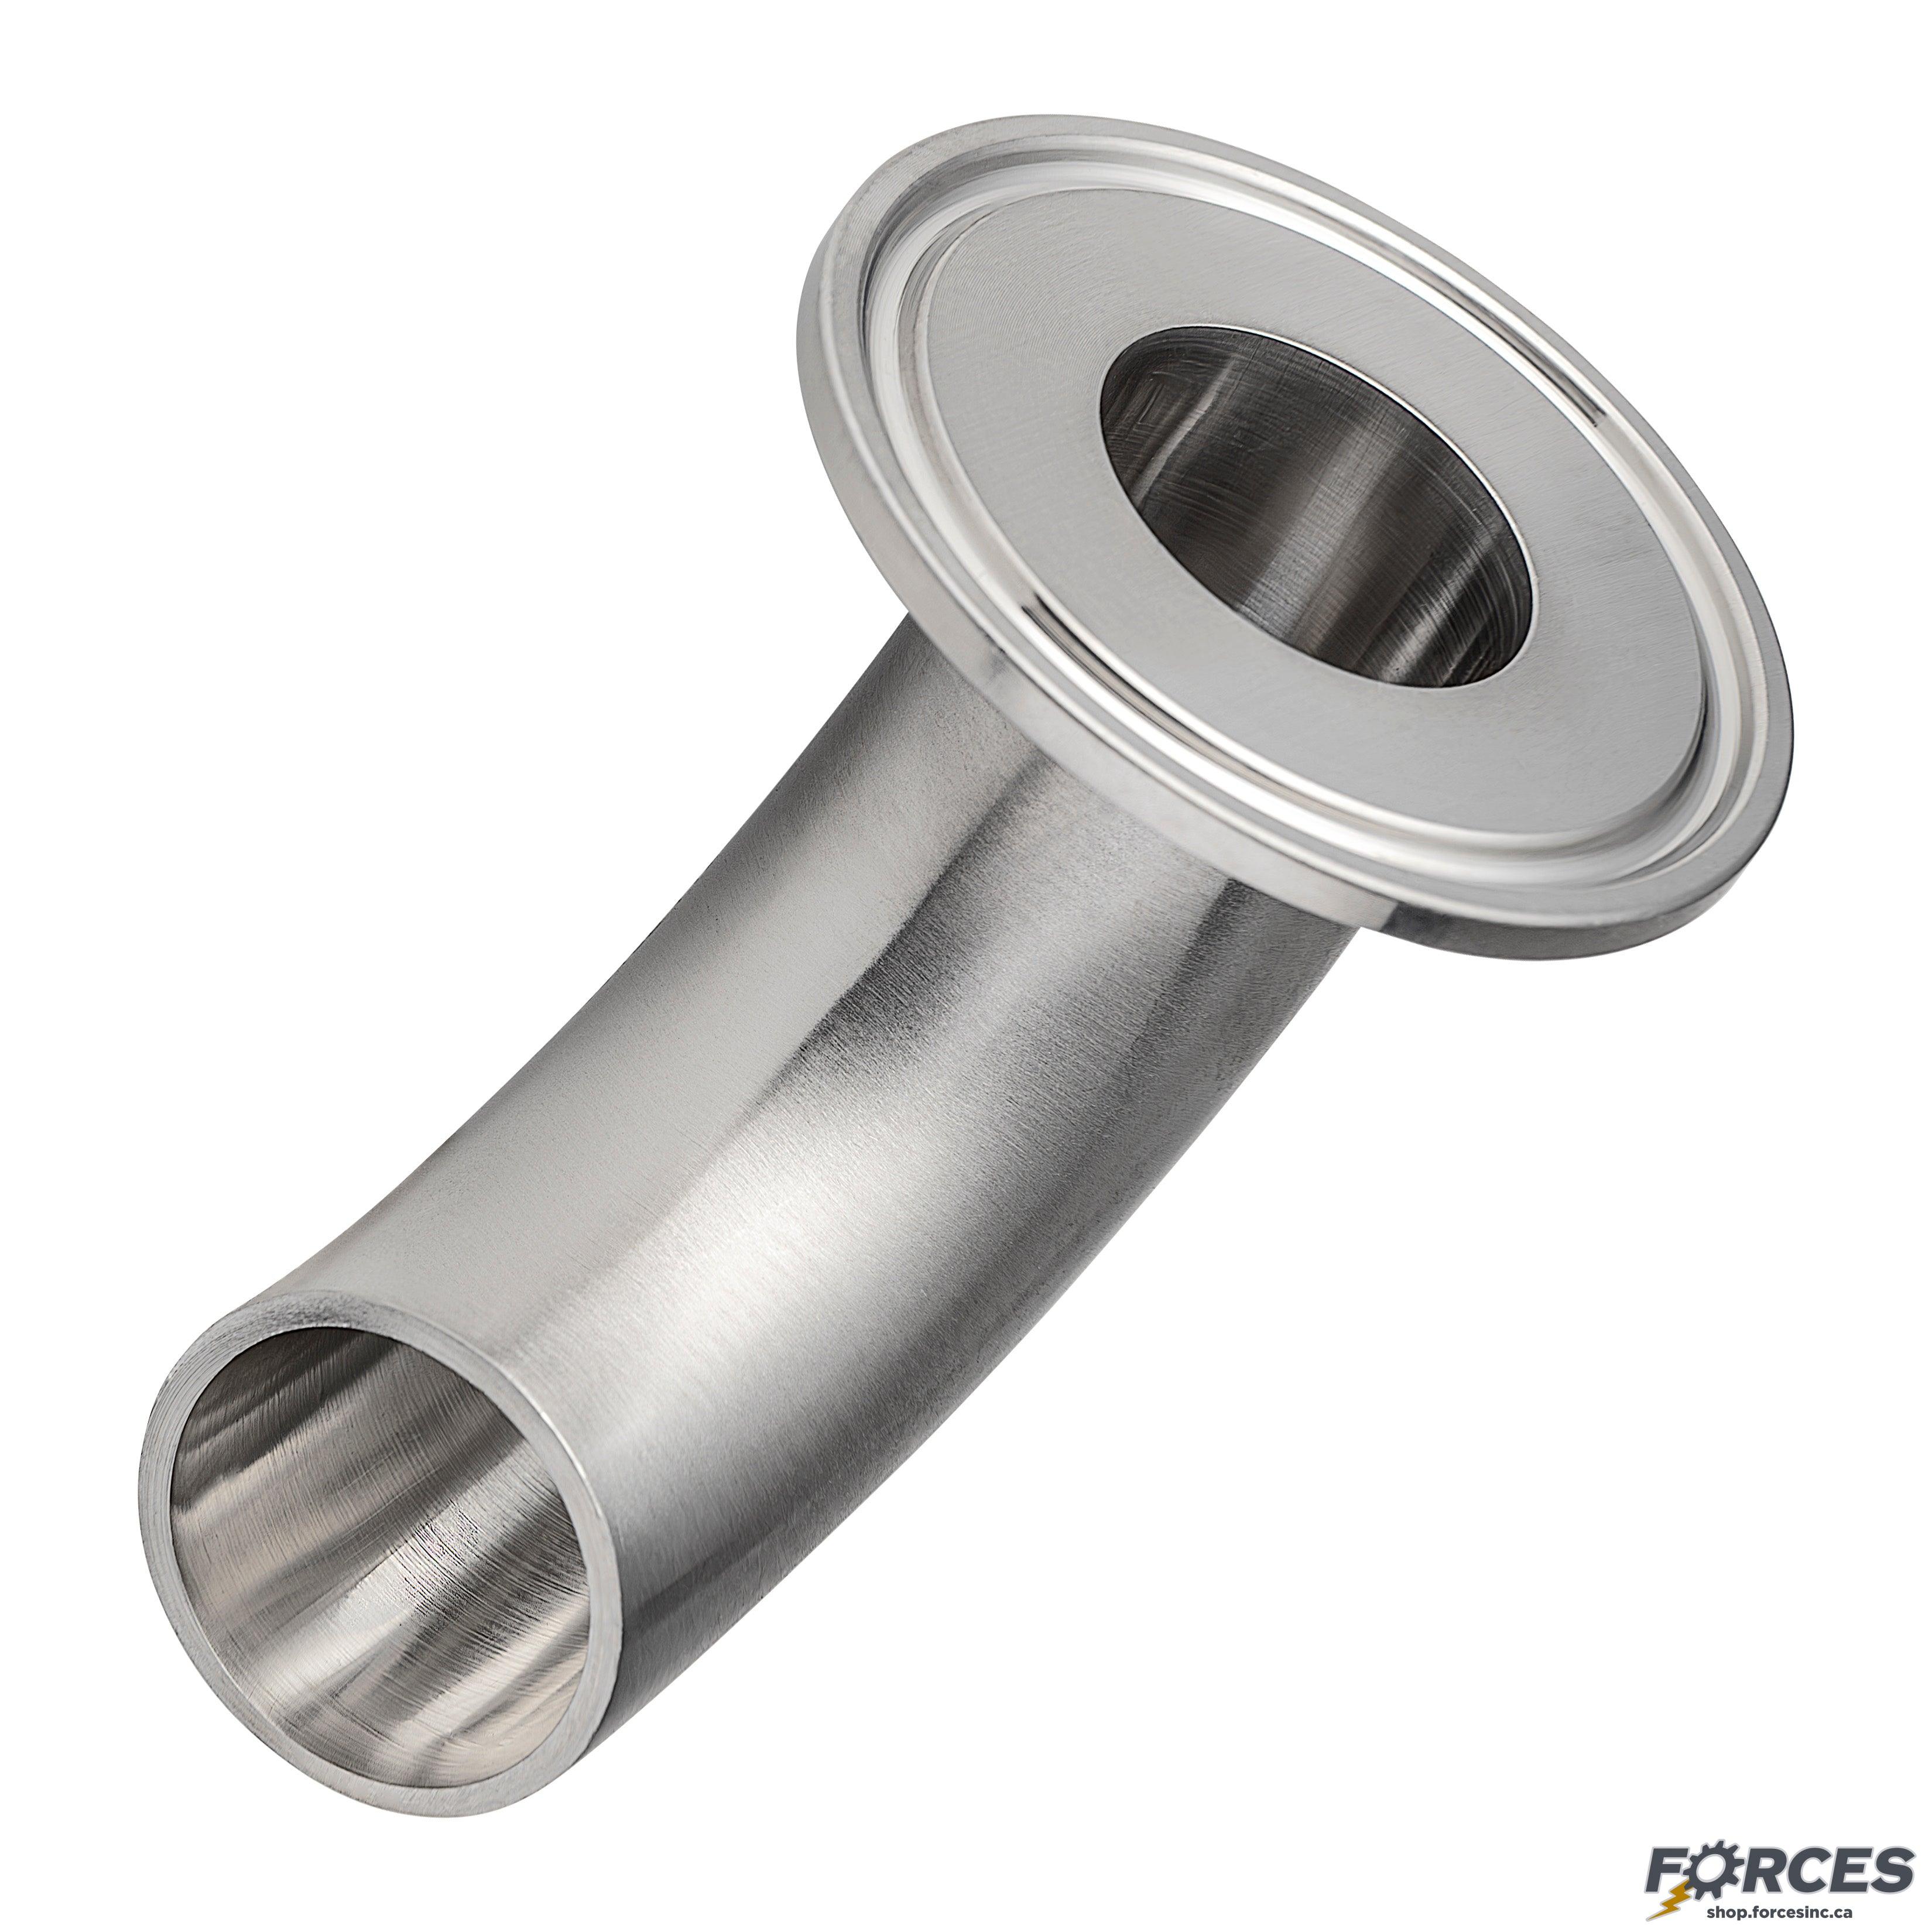 1" 90° Elbow Tri-Clamp x Buttweld - Stainless Steel 316 - Forces Inc